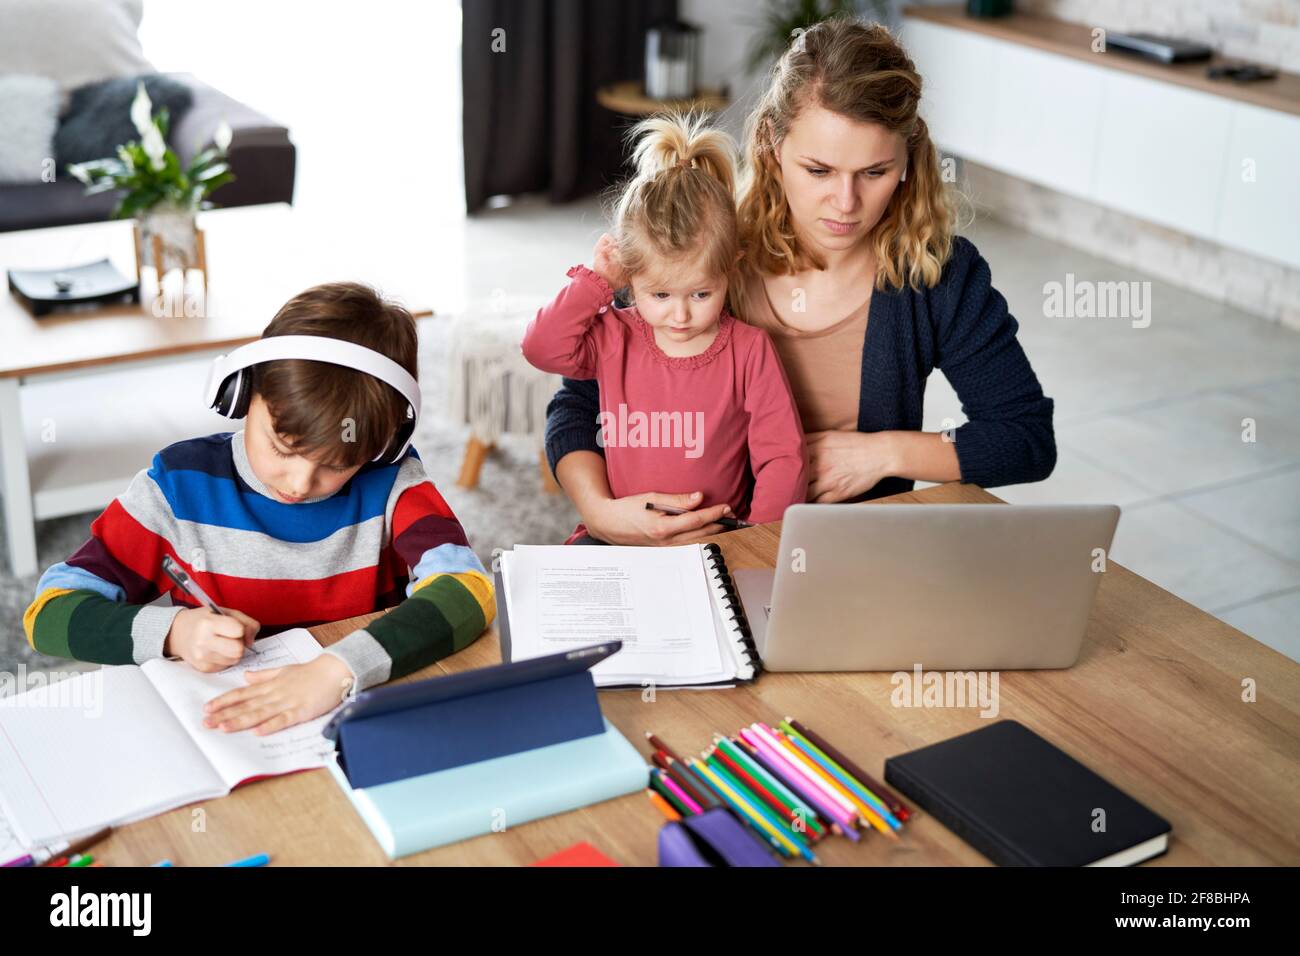 Mother working from home with young children in quarantine isolation Stock Photo